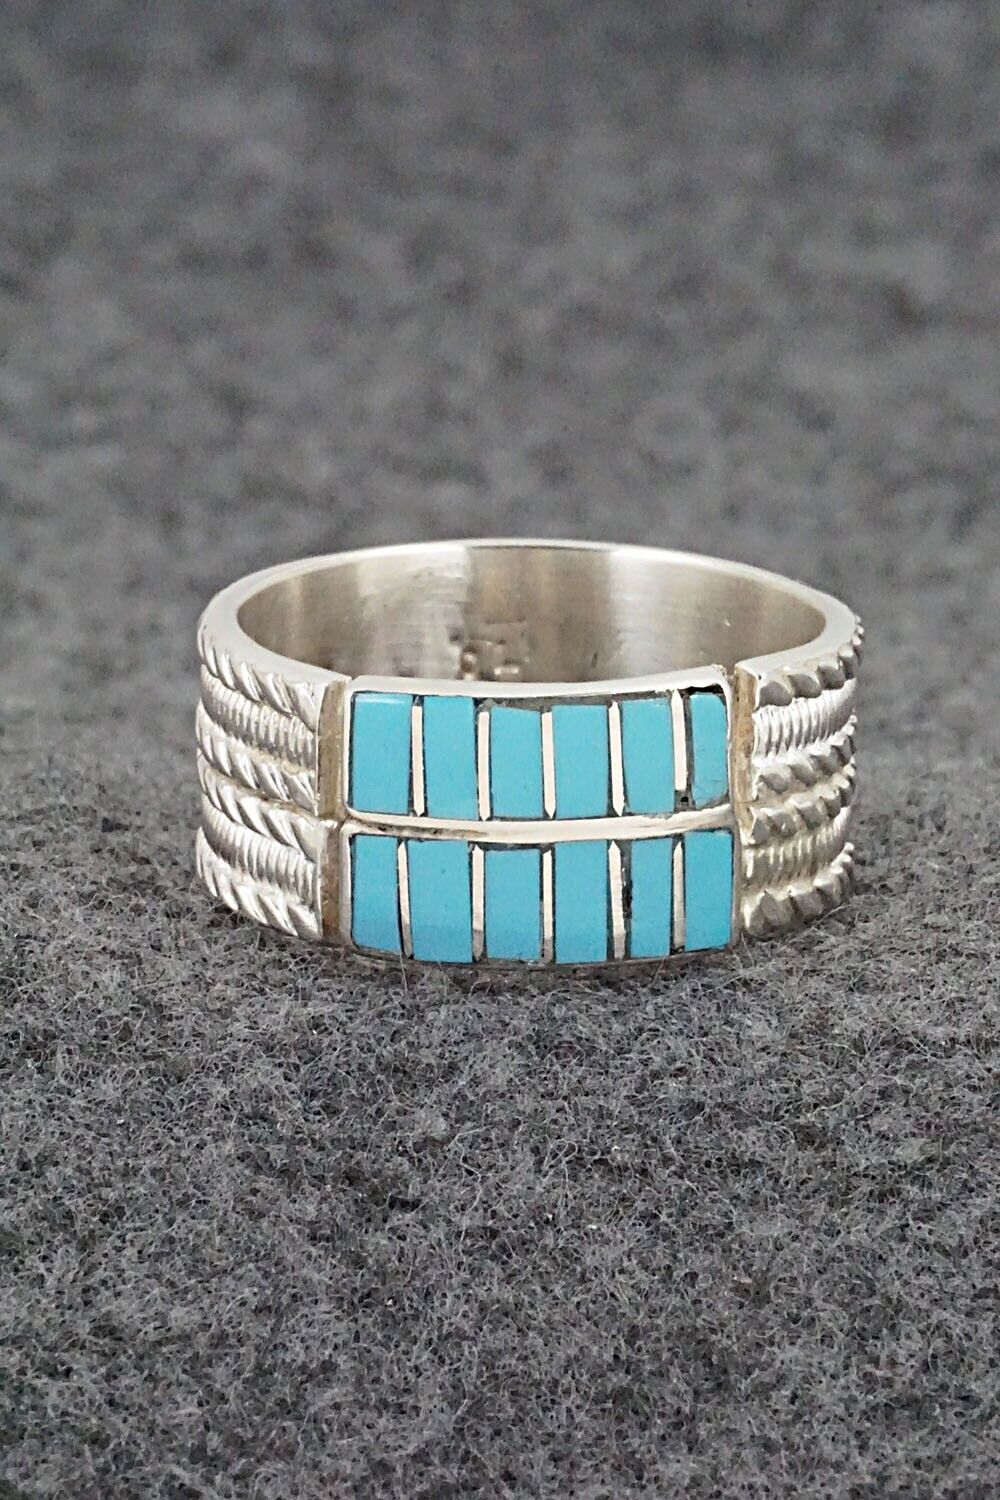 Turquoise & Sterling Silver Inlay Ring - Orlando Laweka - Size 12.5